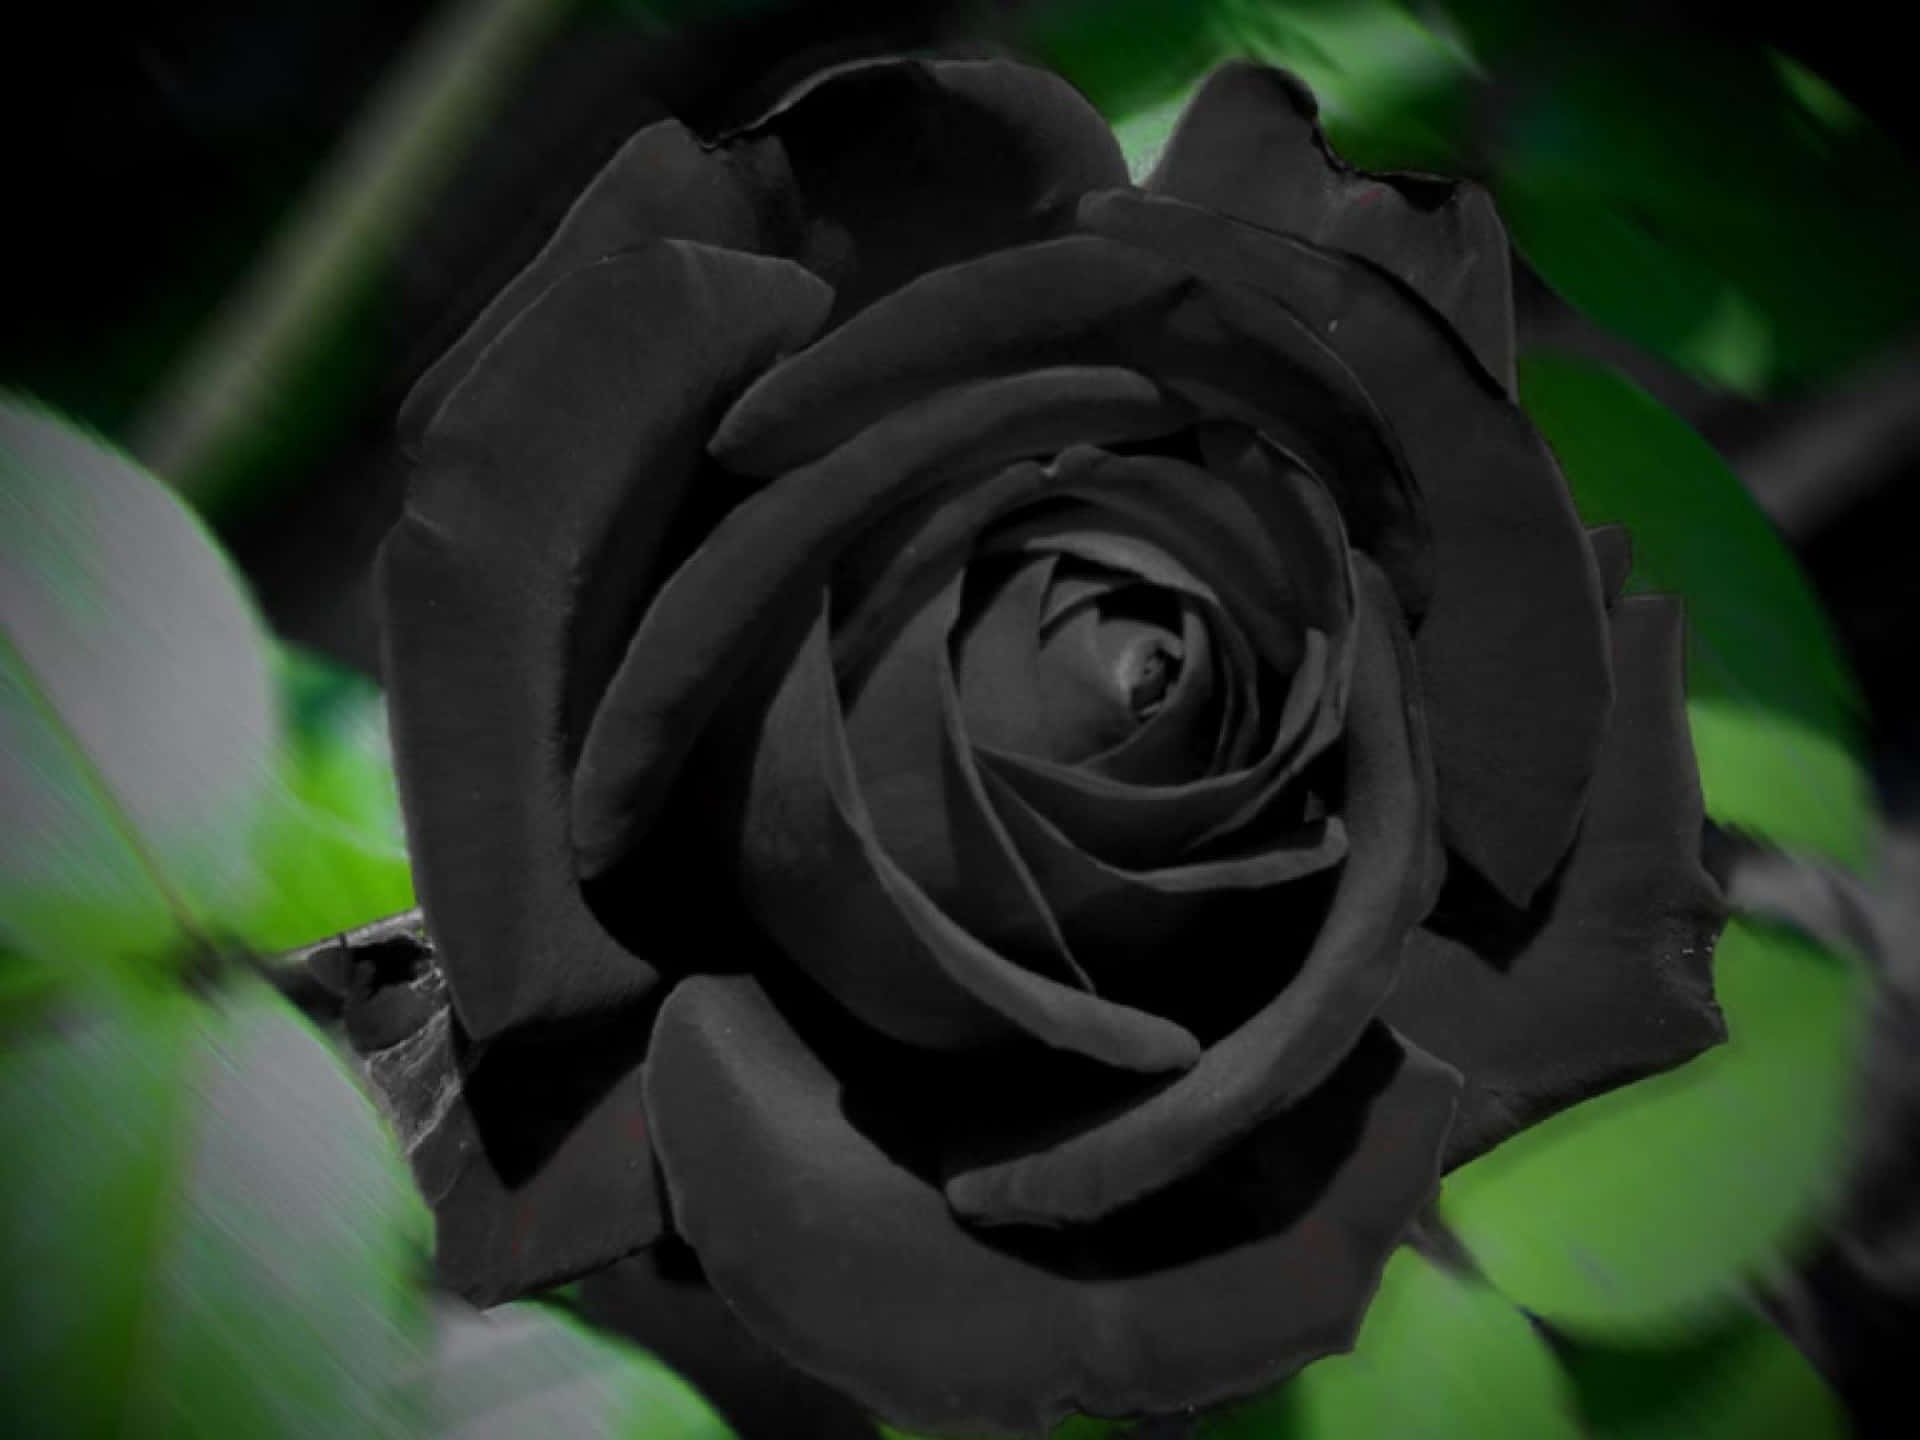 A single beautiful Black Rose against an abstract background